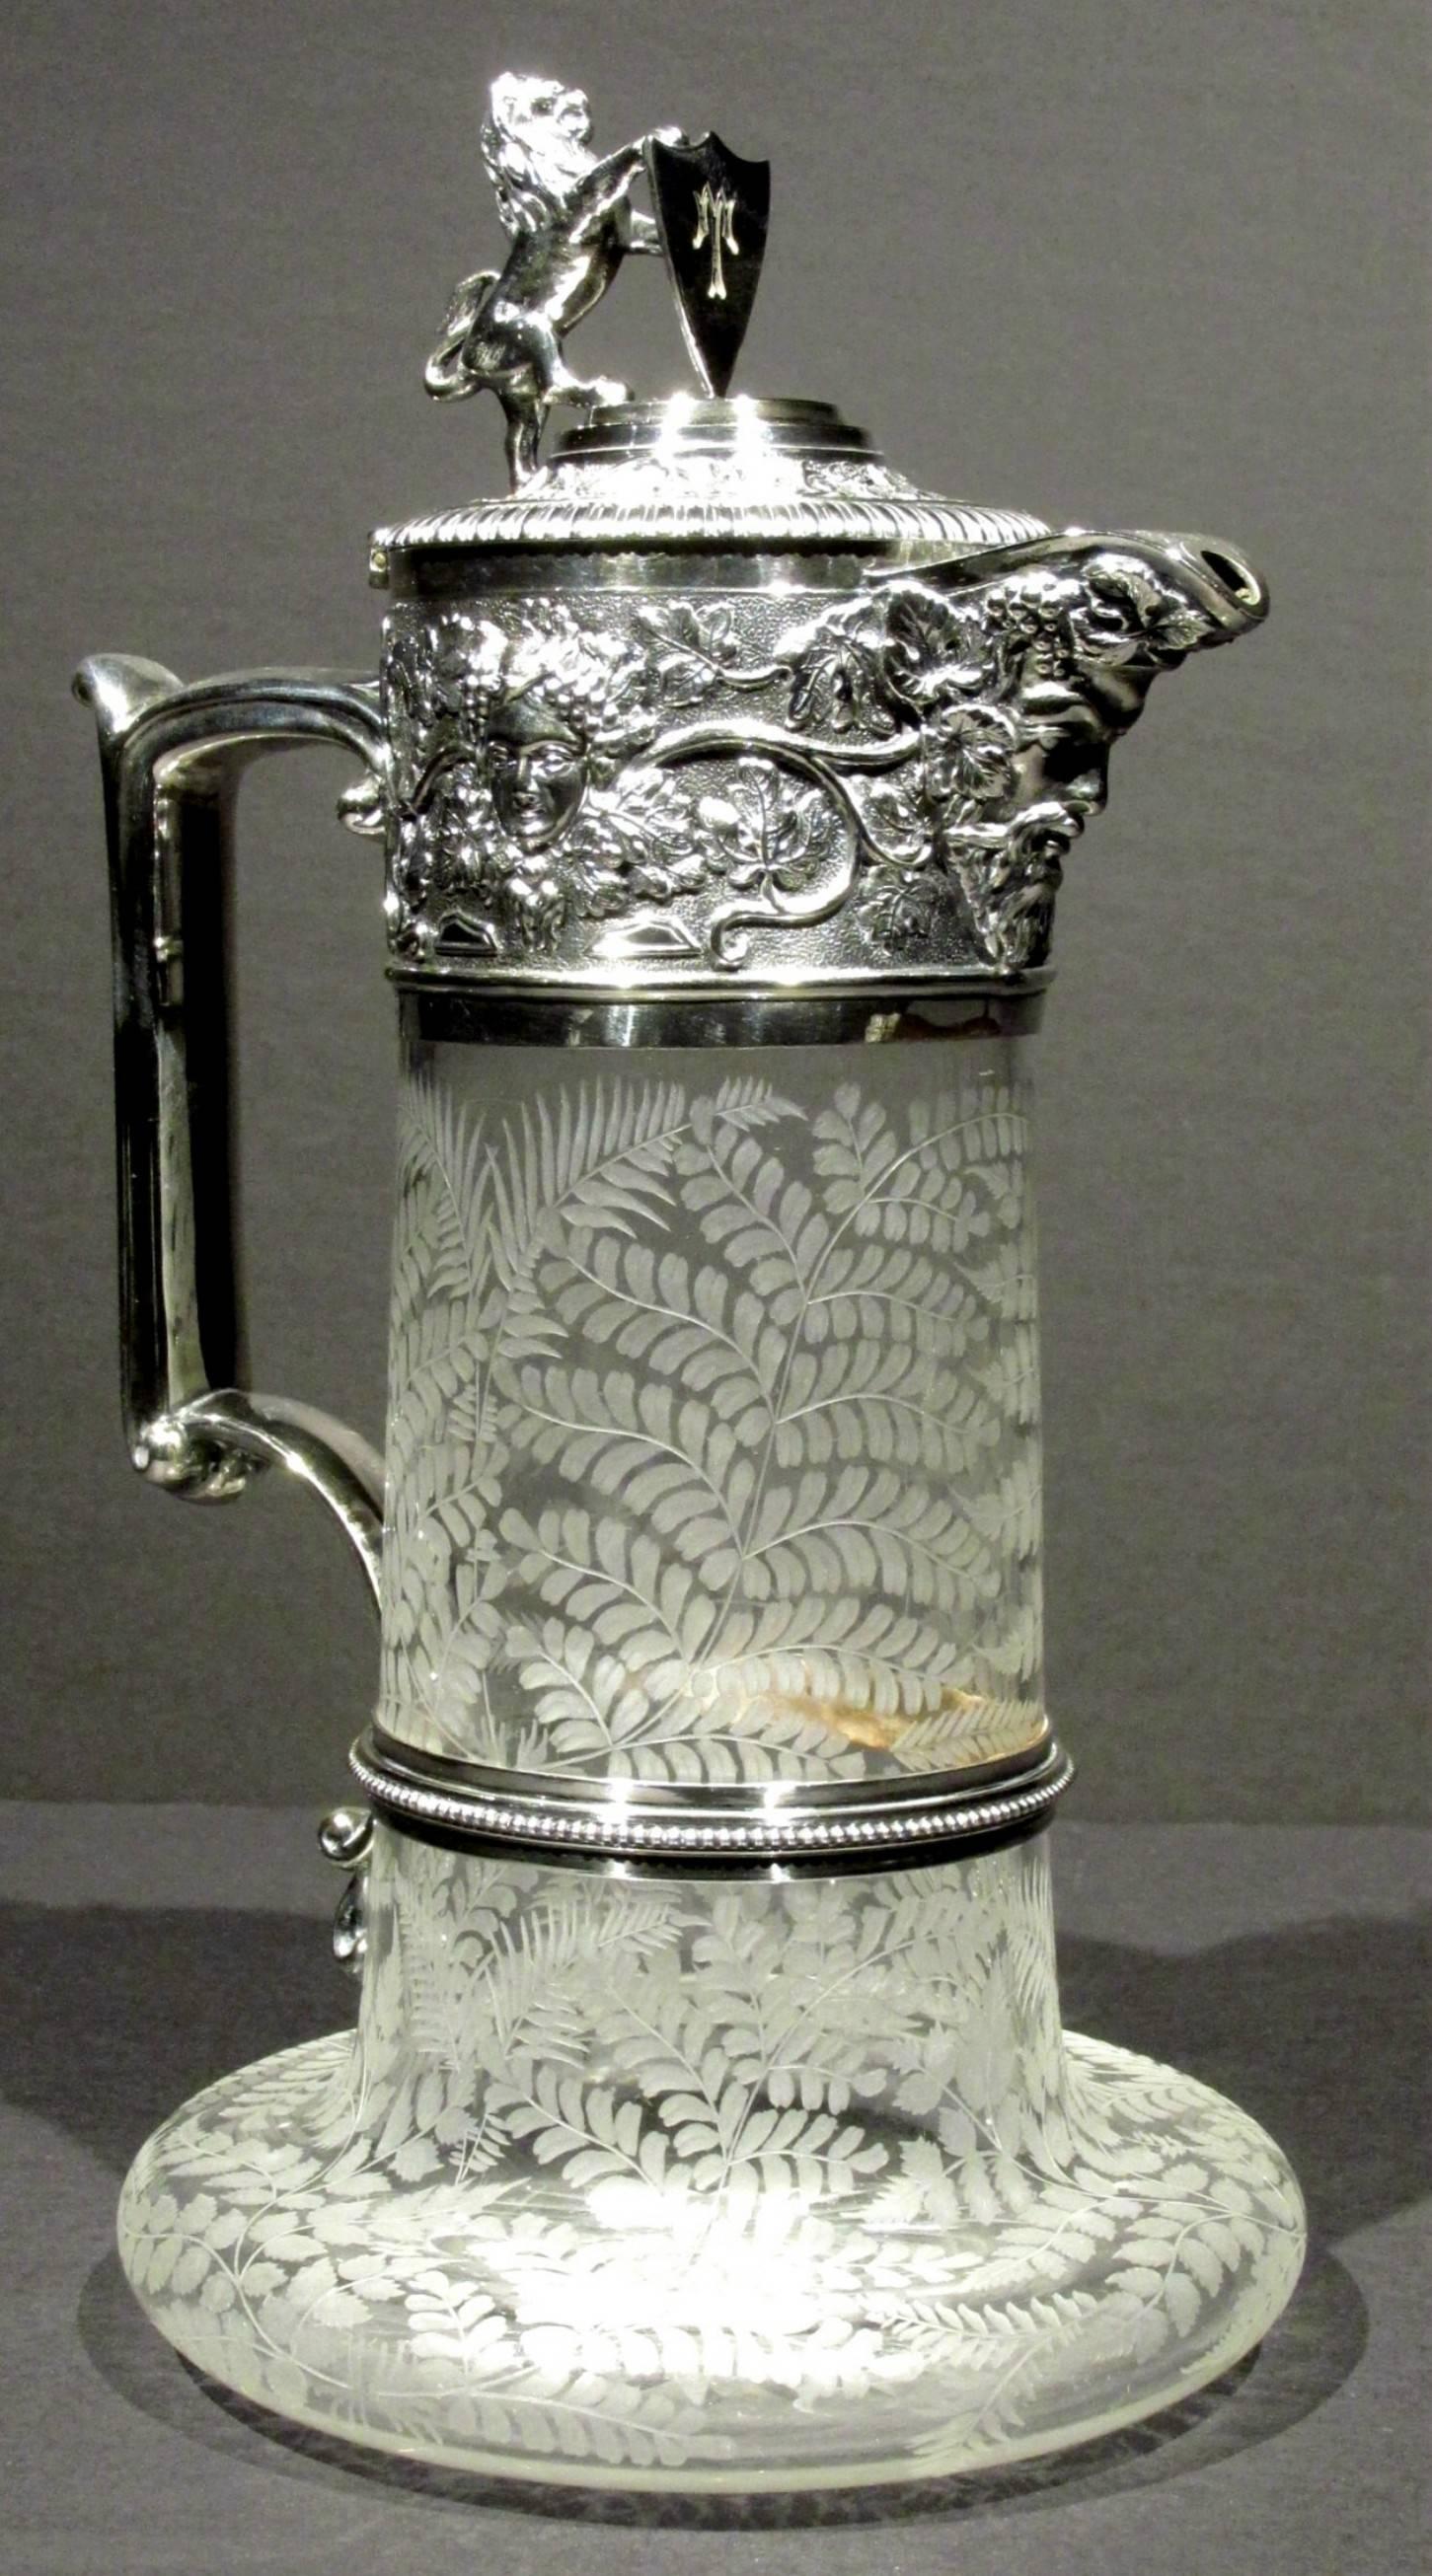 A superb example by the finest British silver plating specialists of the 19th century.
The glass body profusely etched with leafy motifs and vinery, rising from a flattened base to a cylindrical body fitted with a richly embossed collar bearing